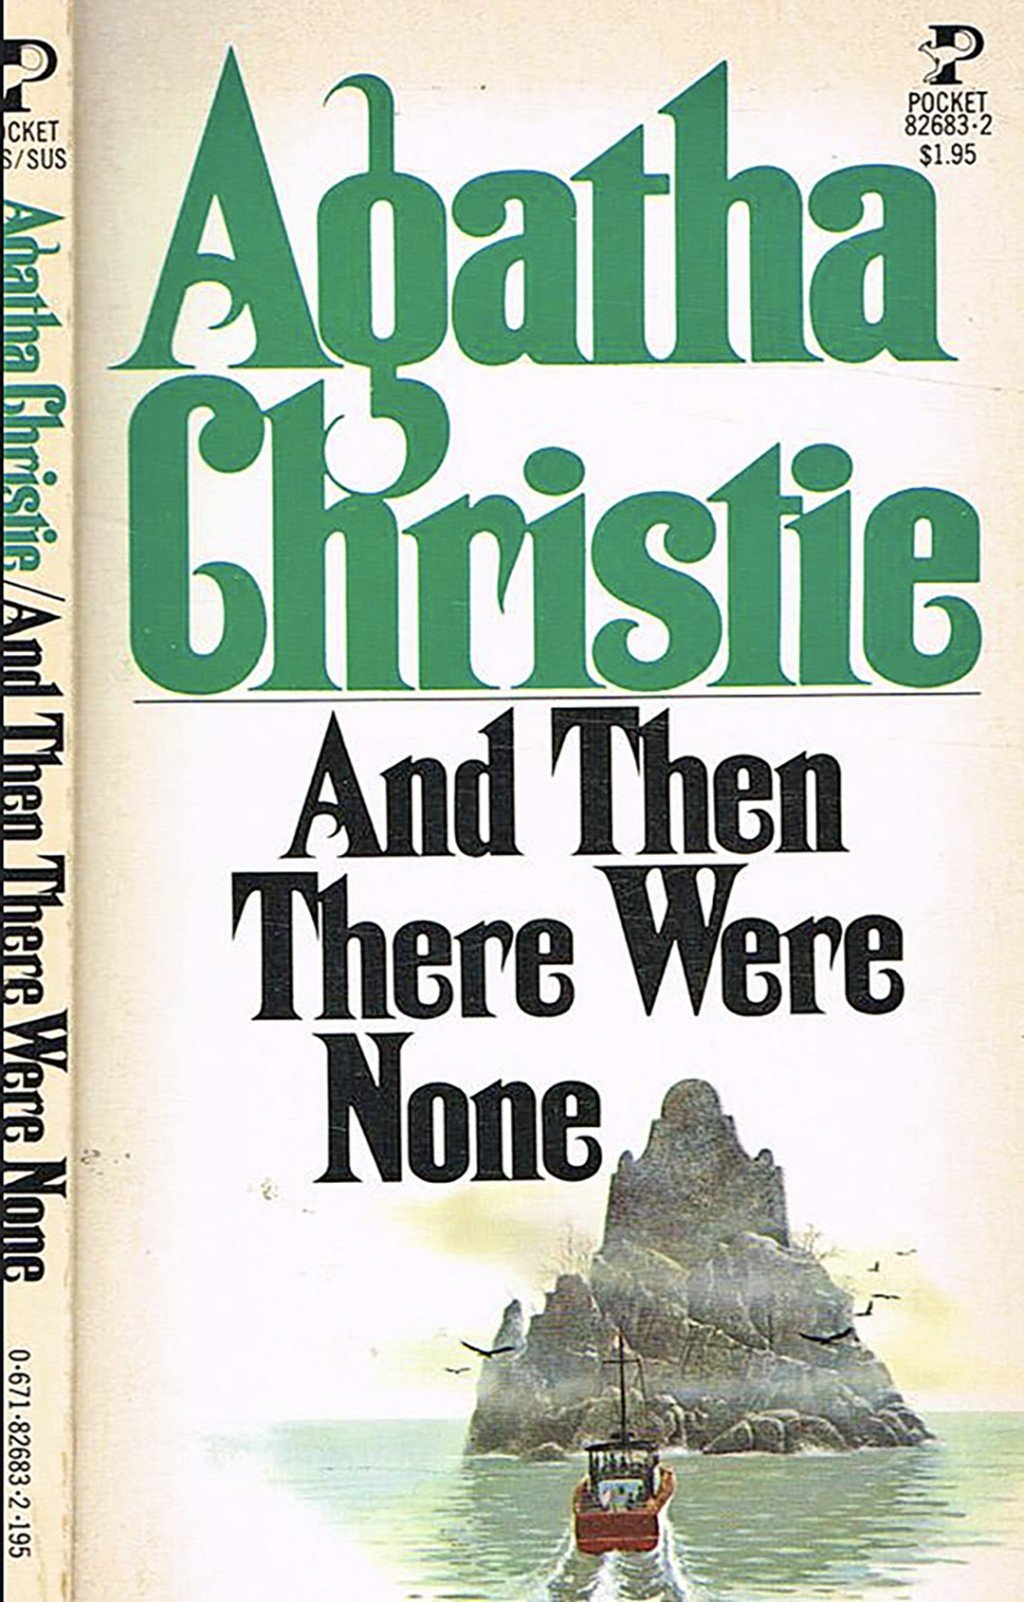 And Then There Were None, by Agatha Christie